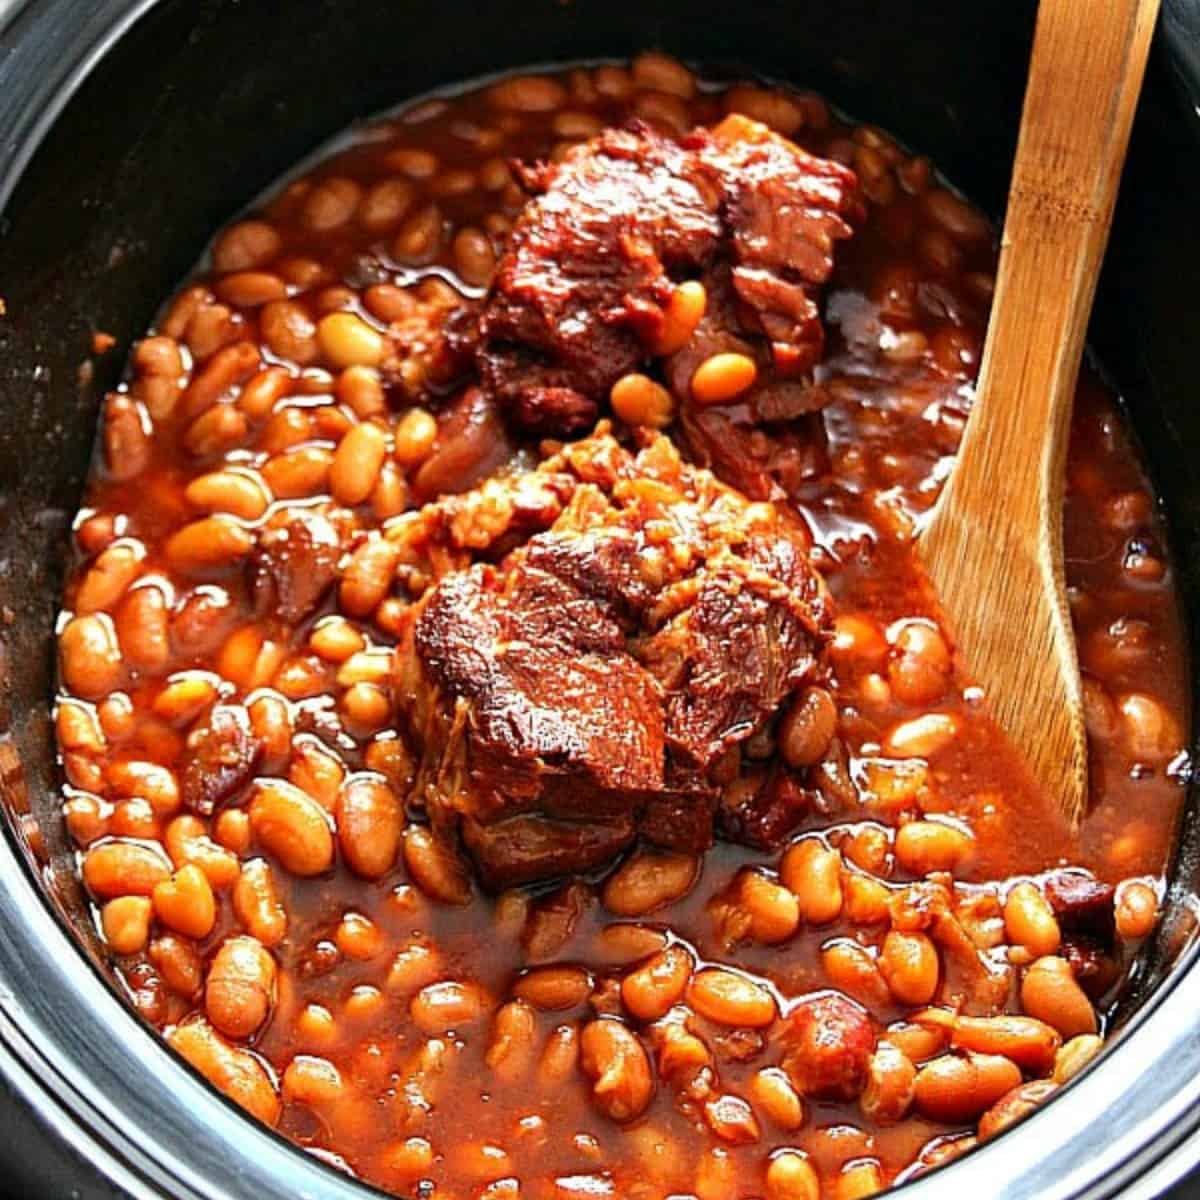 How to Cook Beans in Crock Pot - Slow Cooker Beans